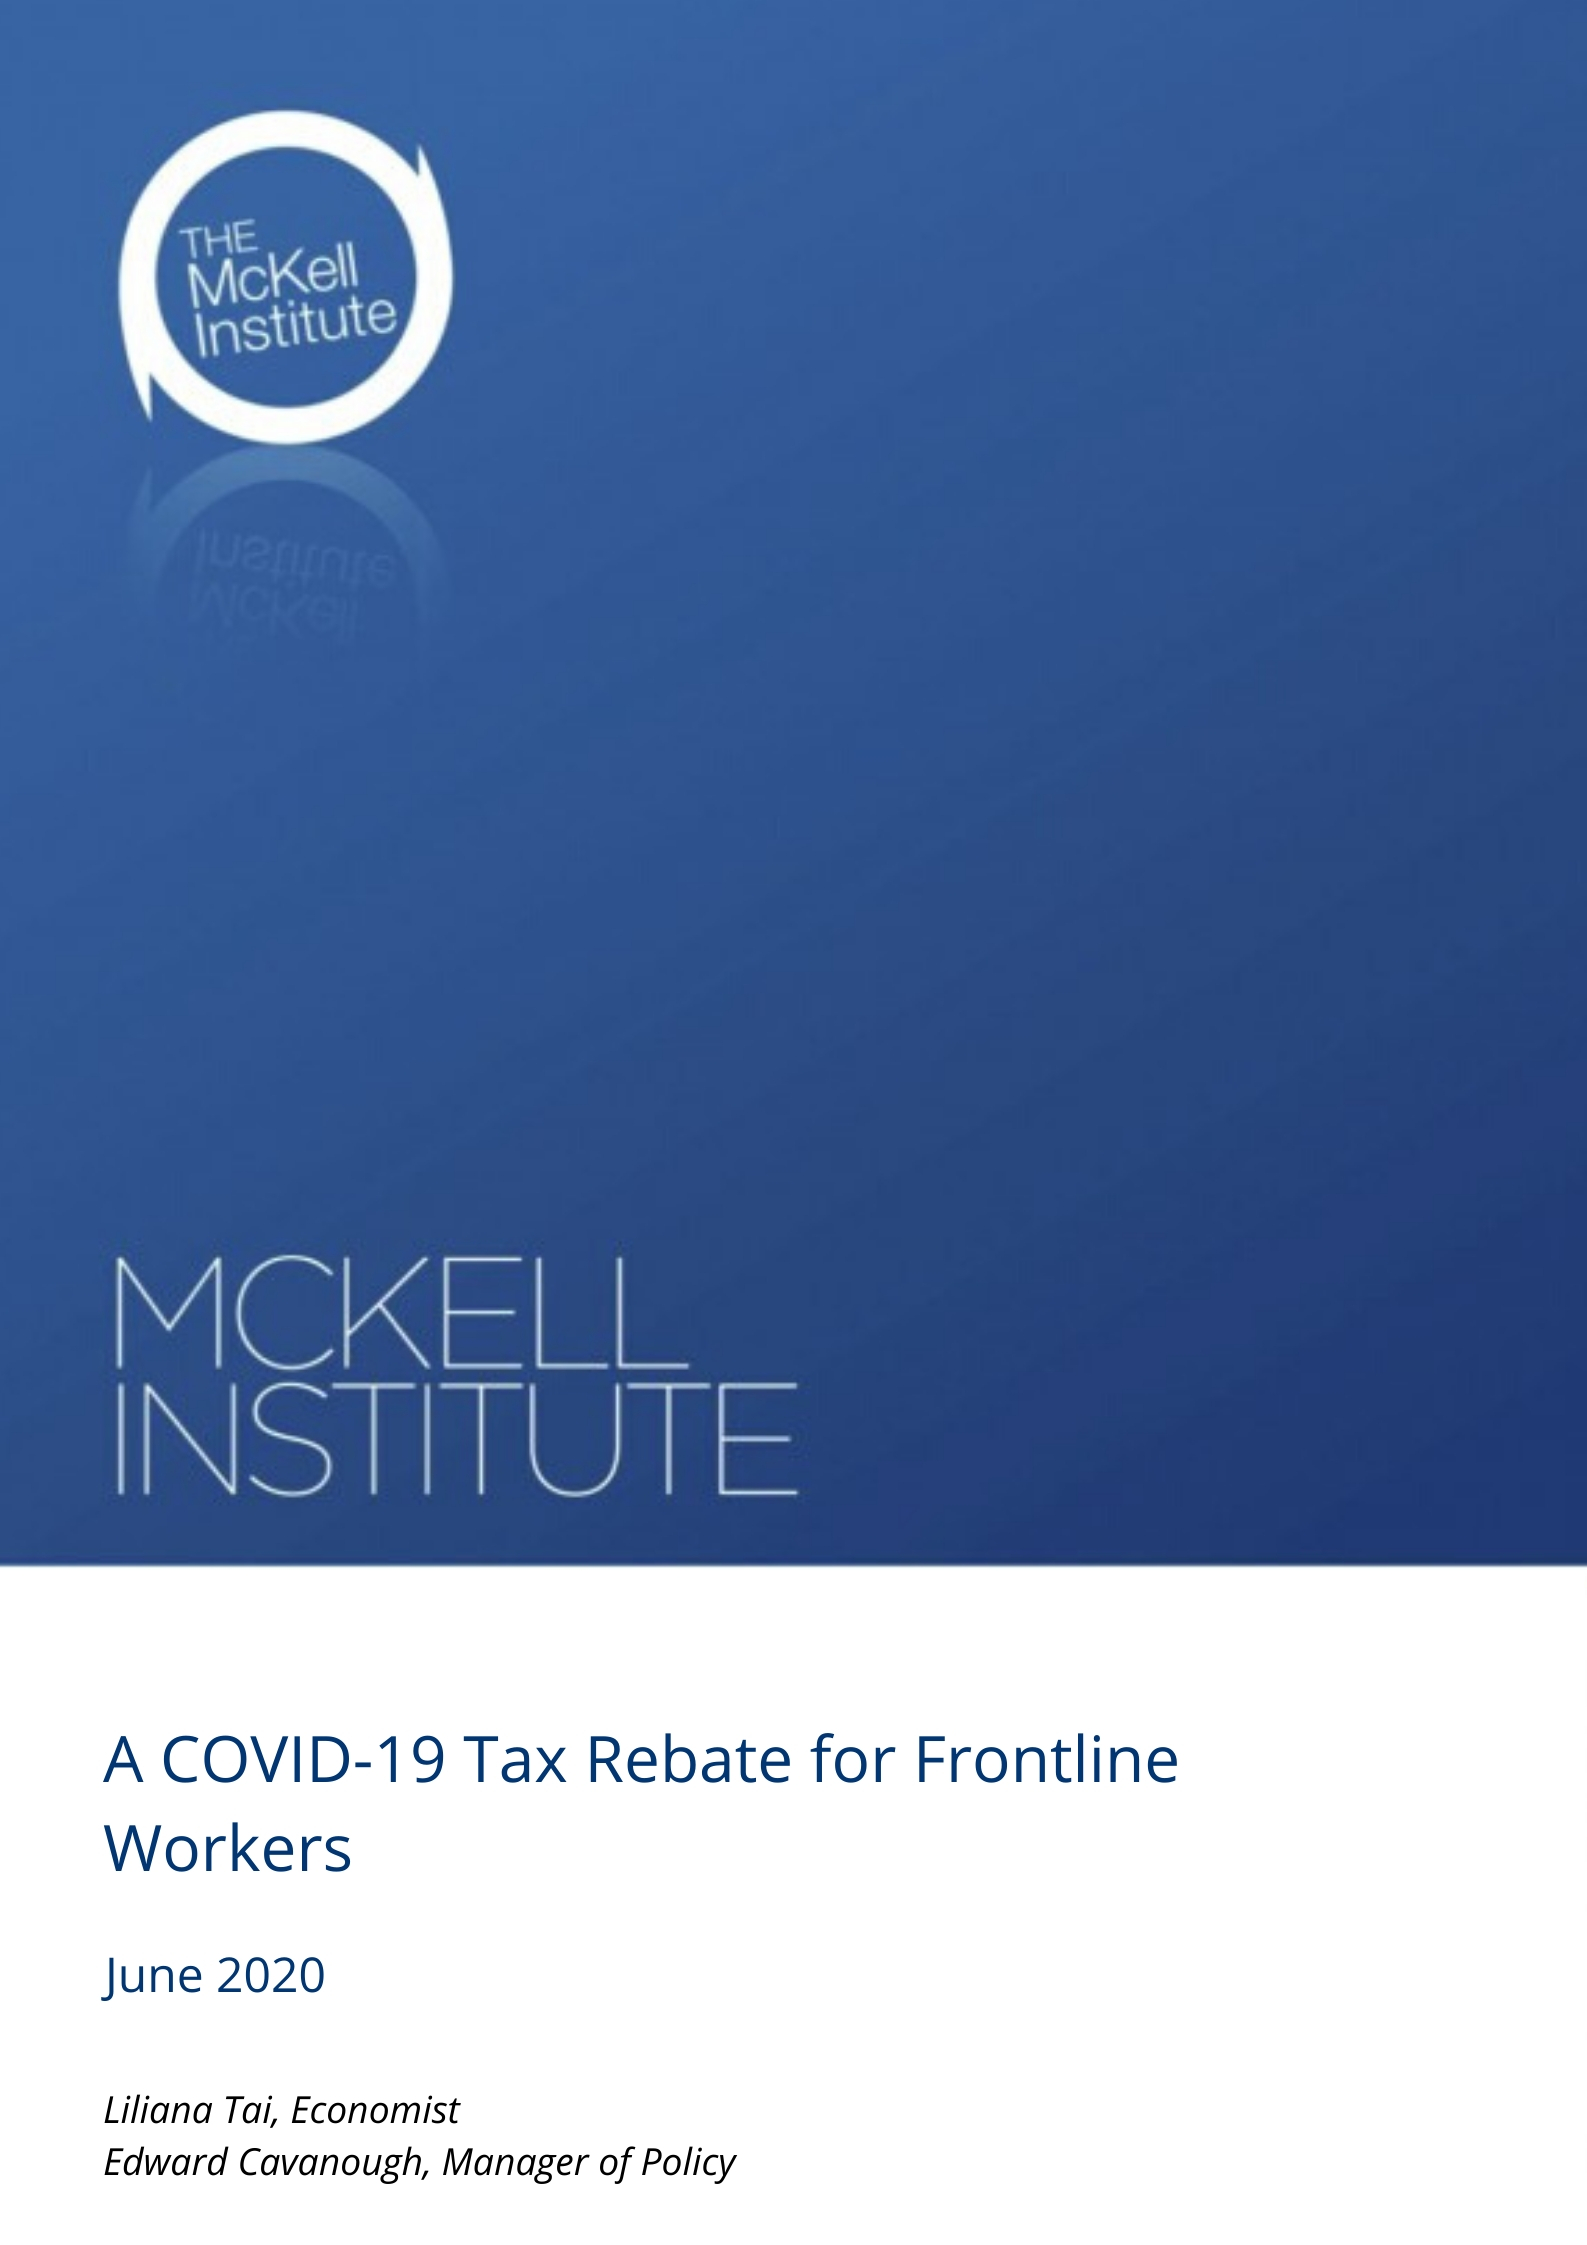 a-covid-19-tax-rebate-for-frontline-workers-the-mckell-institute